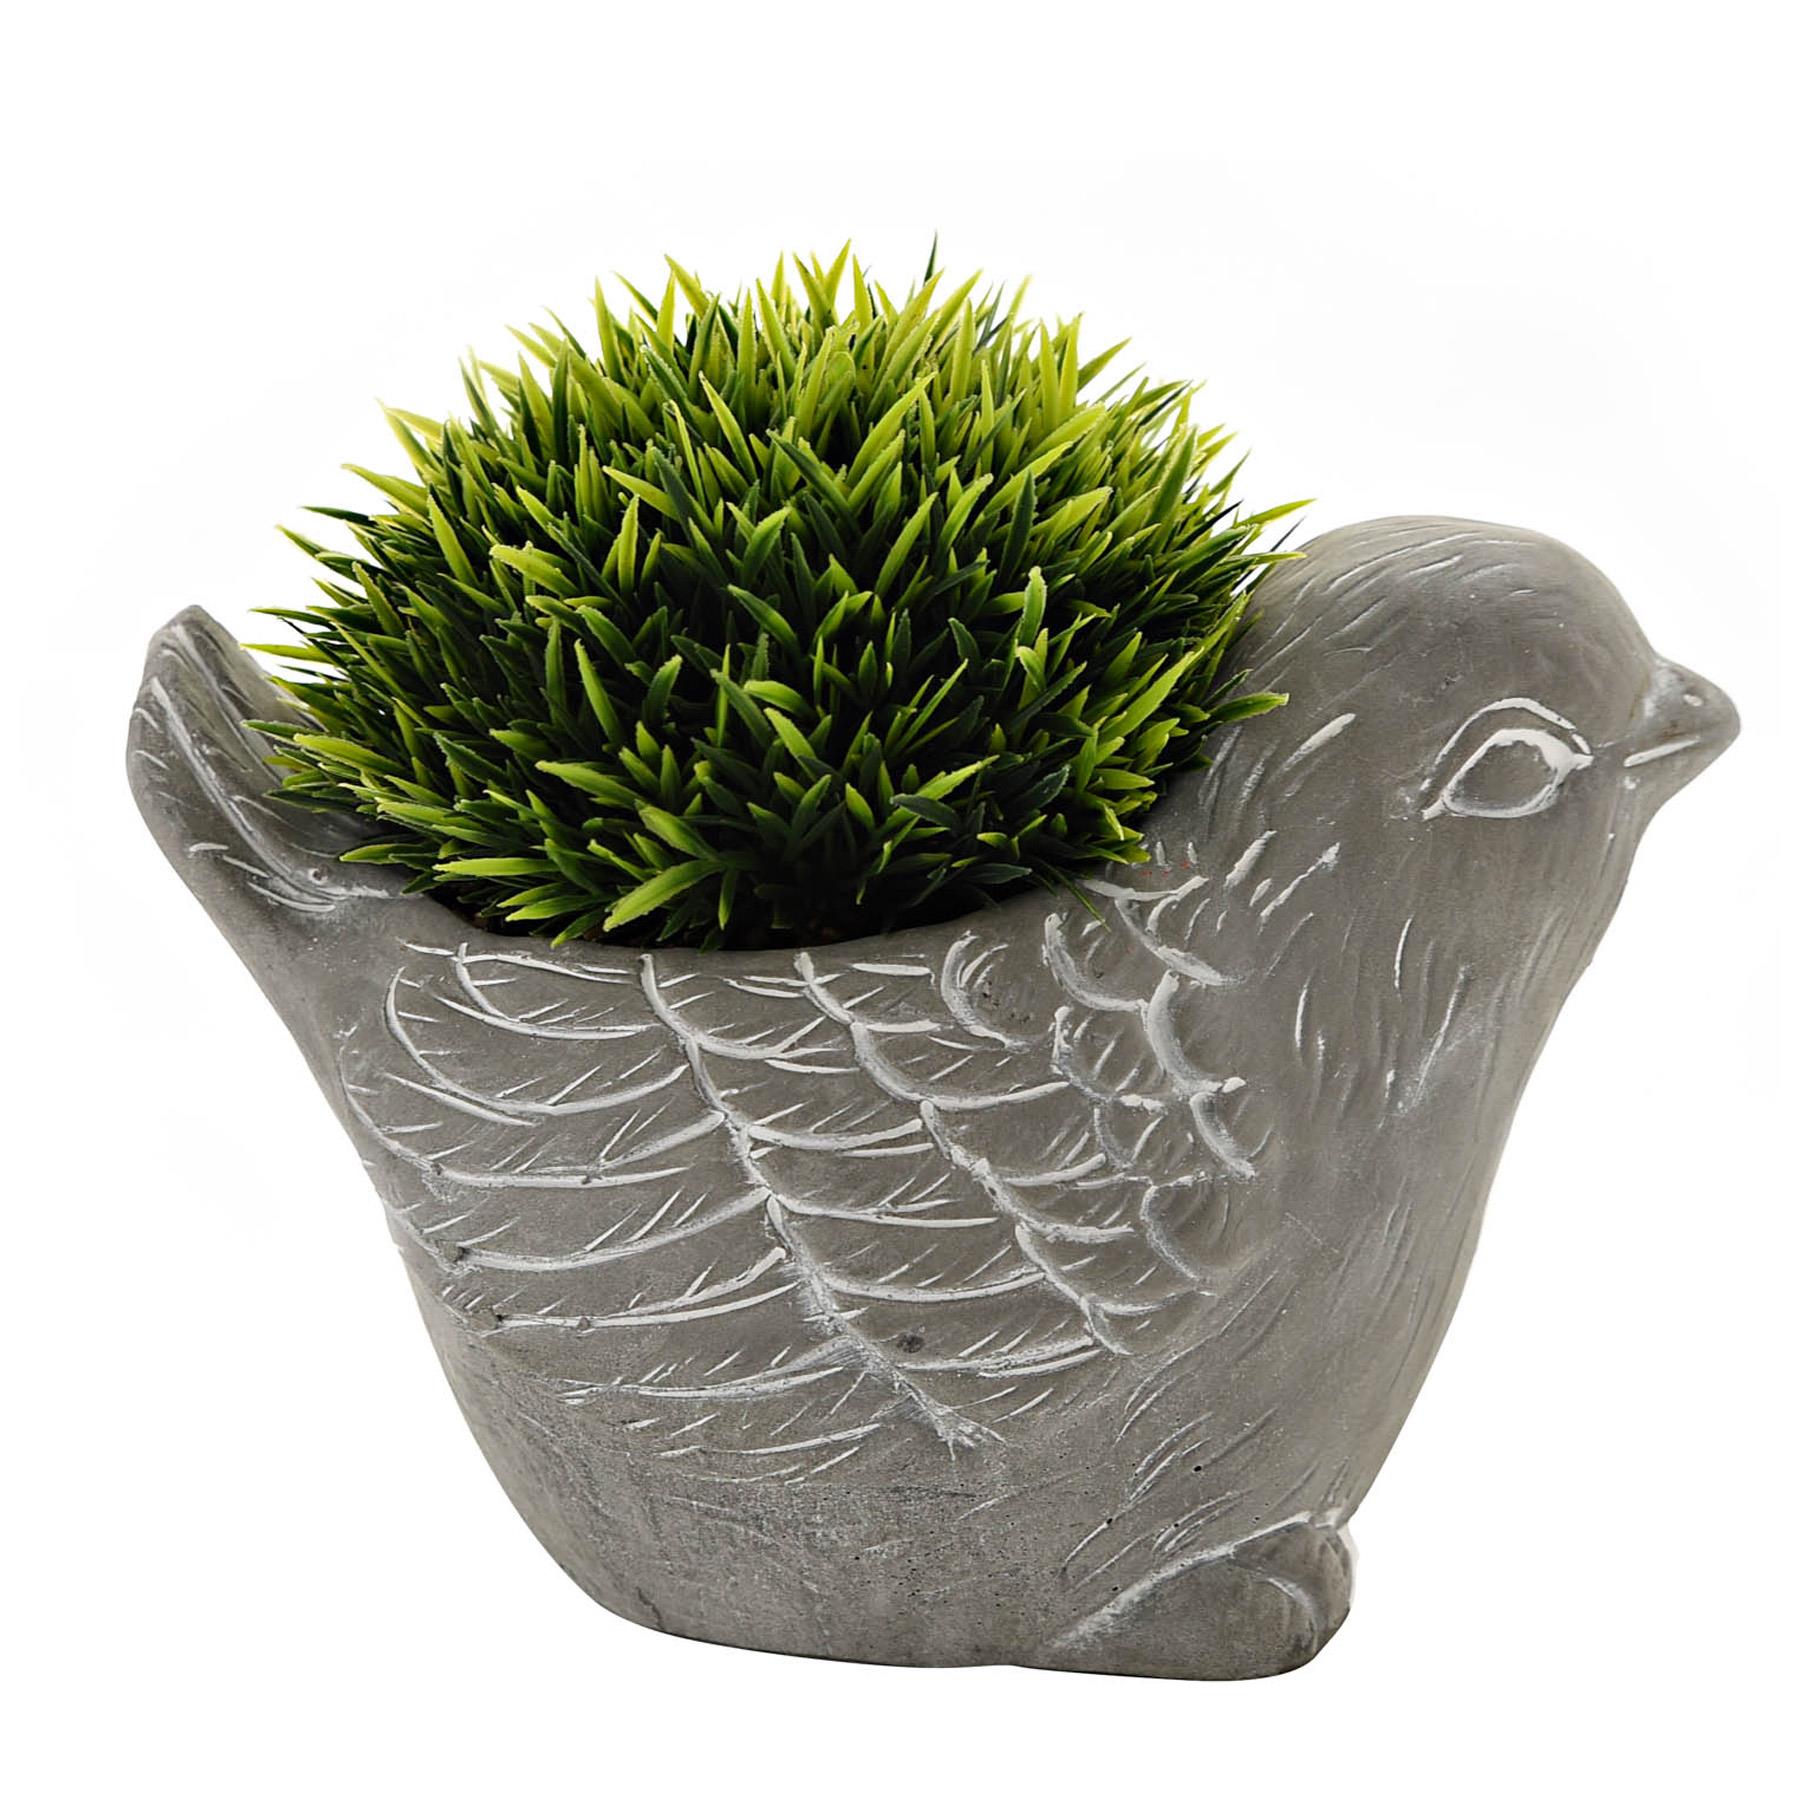 Cement Effect Animal Planter with Succulent - Bird